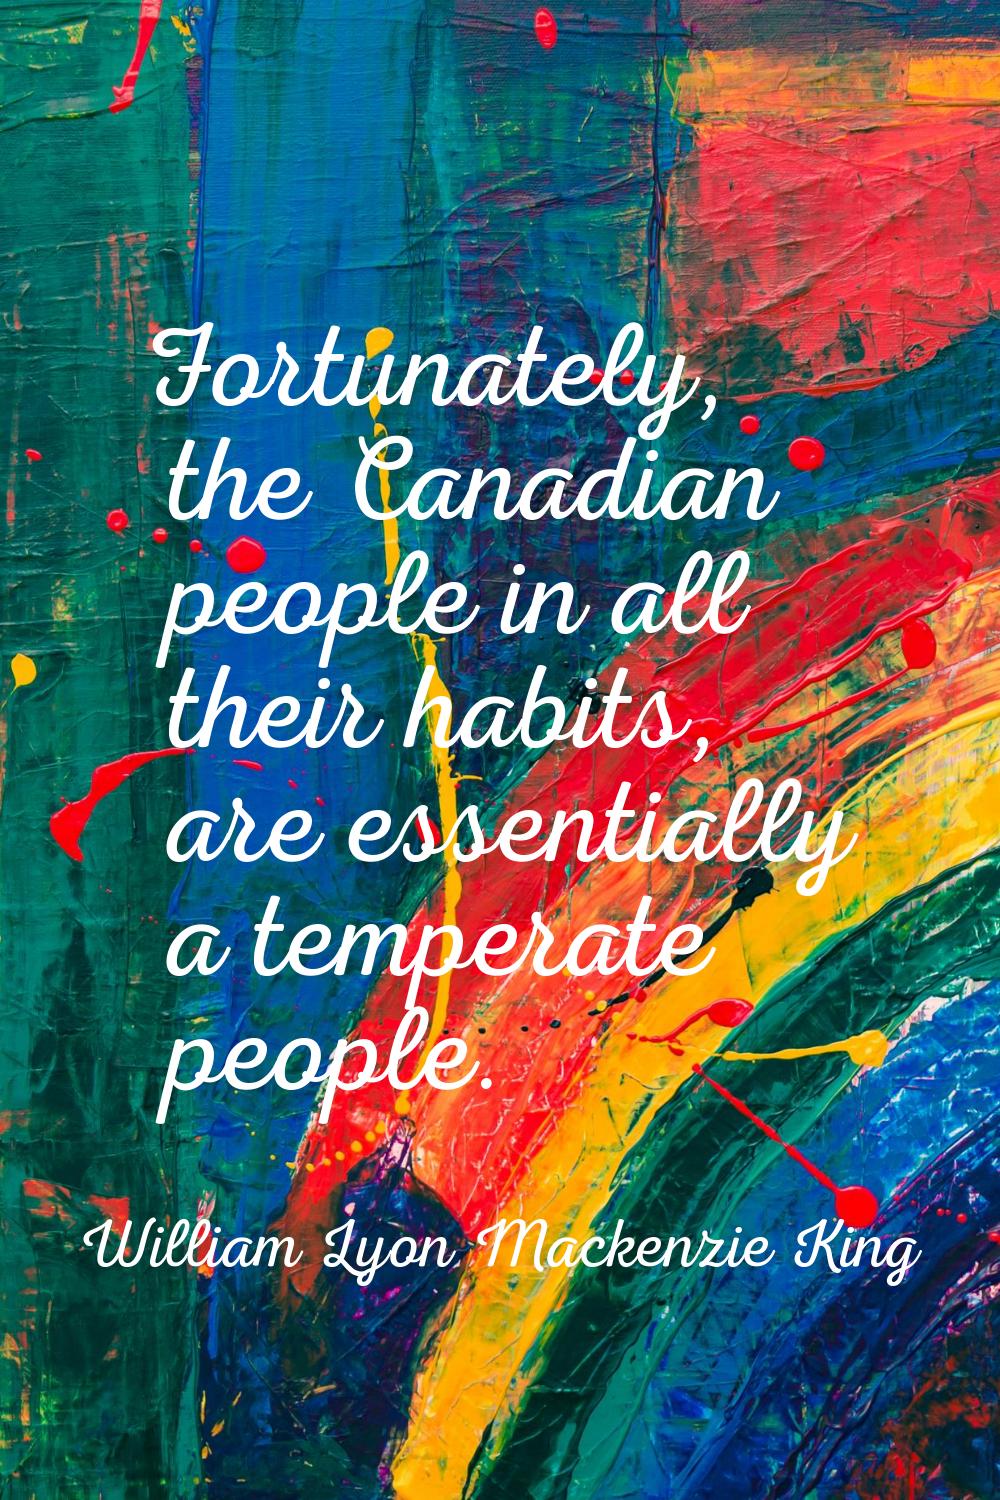 Fortunately, the Canadian people in all their habits, are essentially a temperate people.